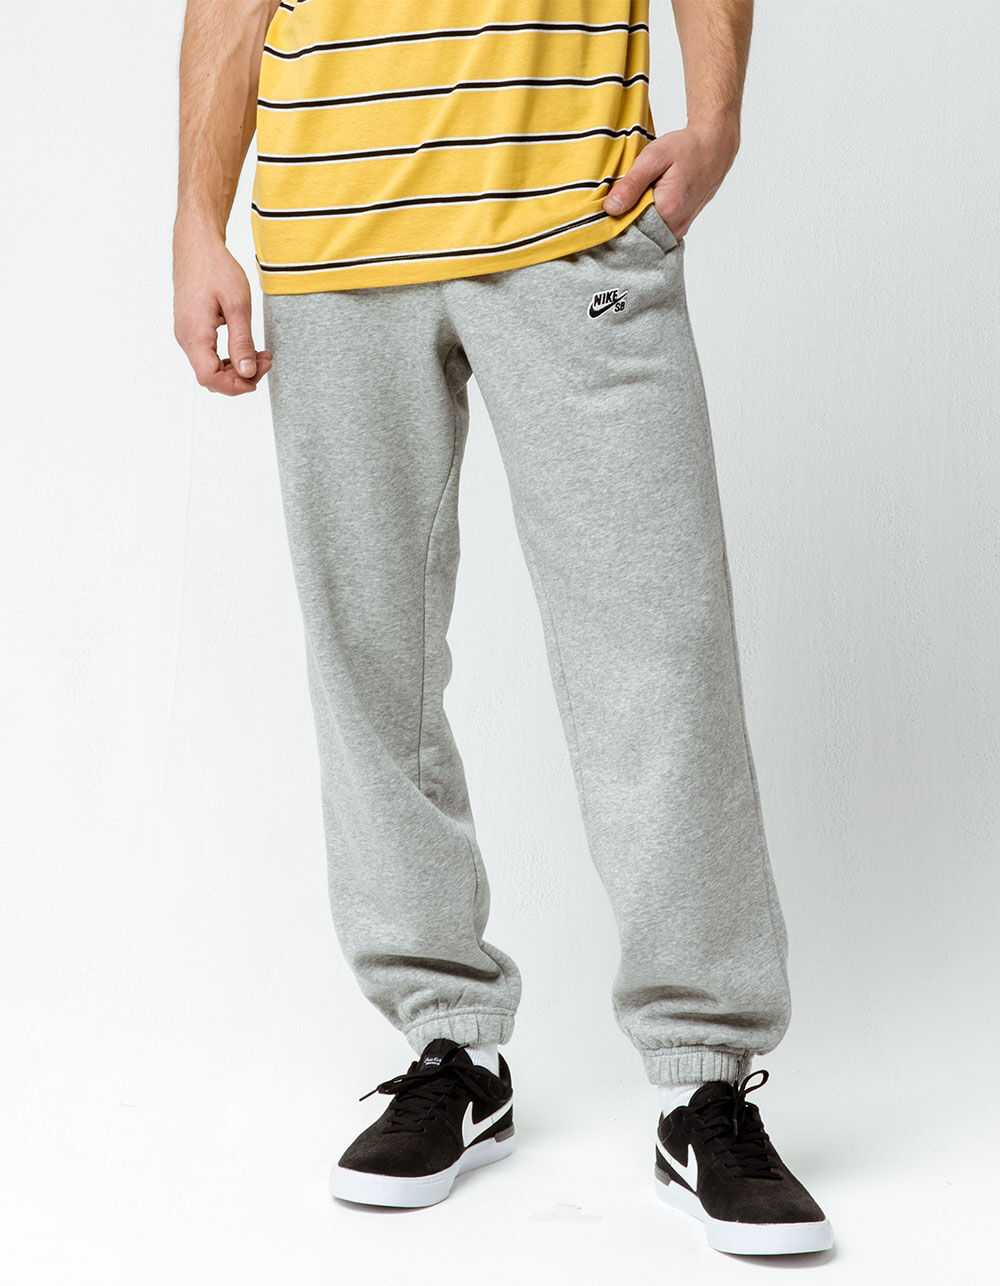 chemicals Scholar her NIKE SB Icon Mens Sweatpants - GRAY | Tillys